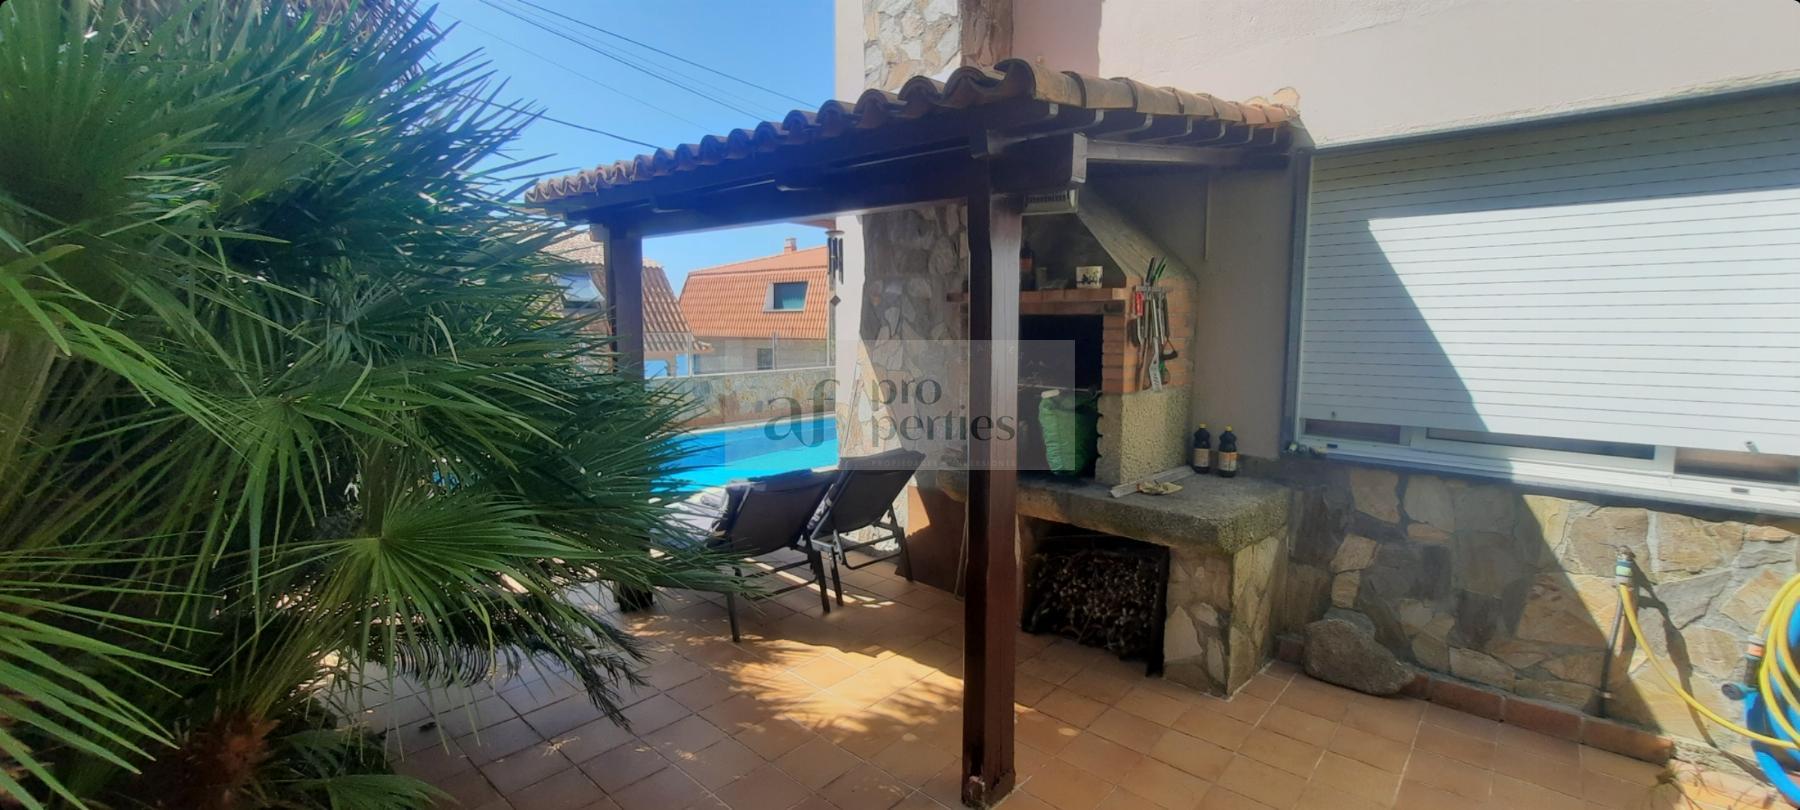 For sale of house in Chapela